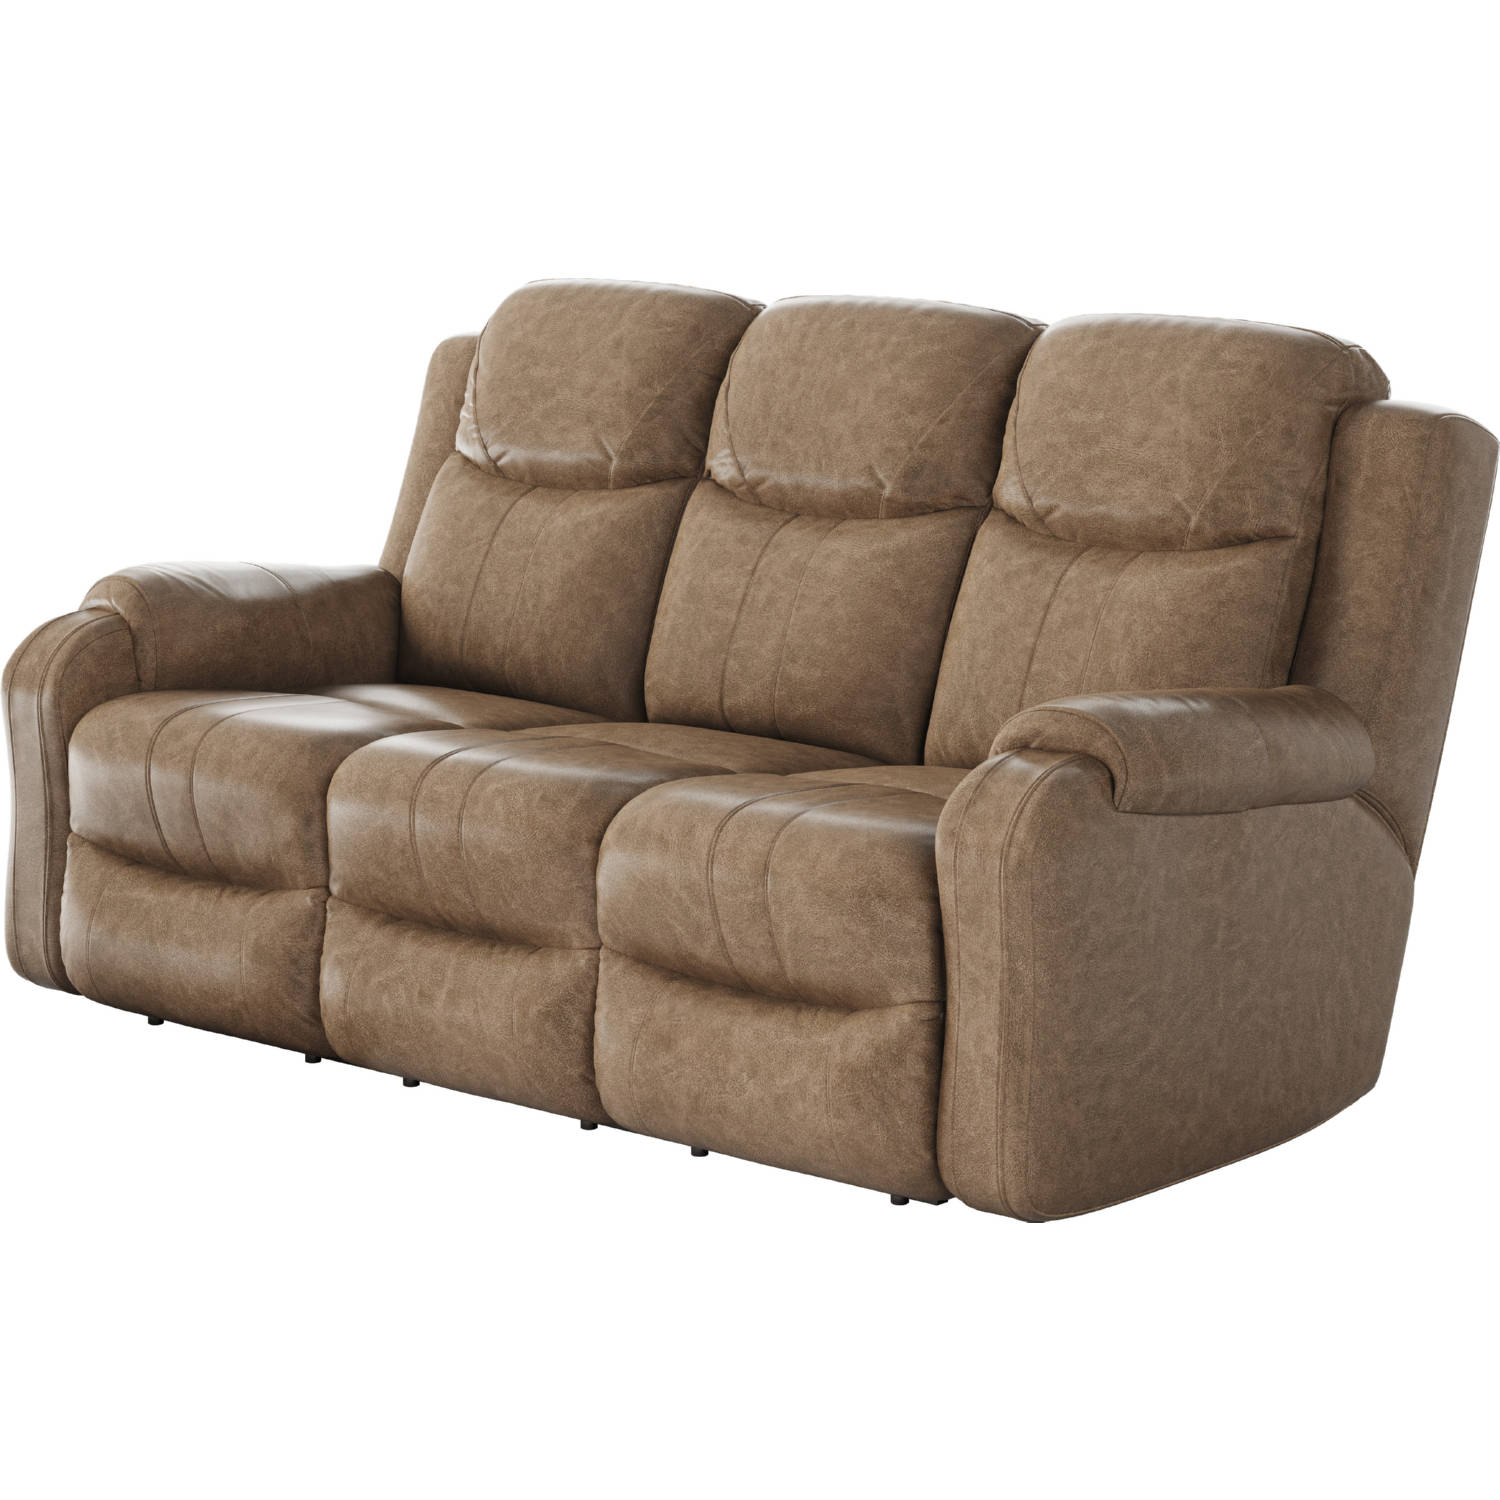 Manual Reclining Sofa Vintage Style Fabric Recliner Chair, Grey